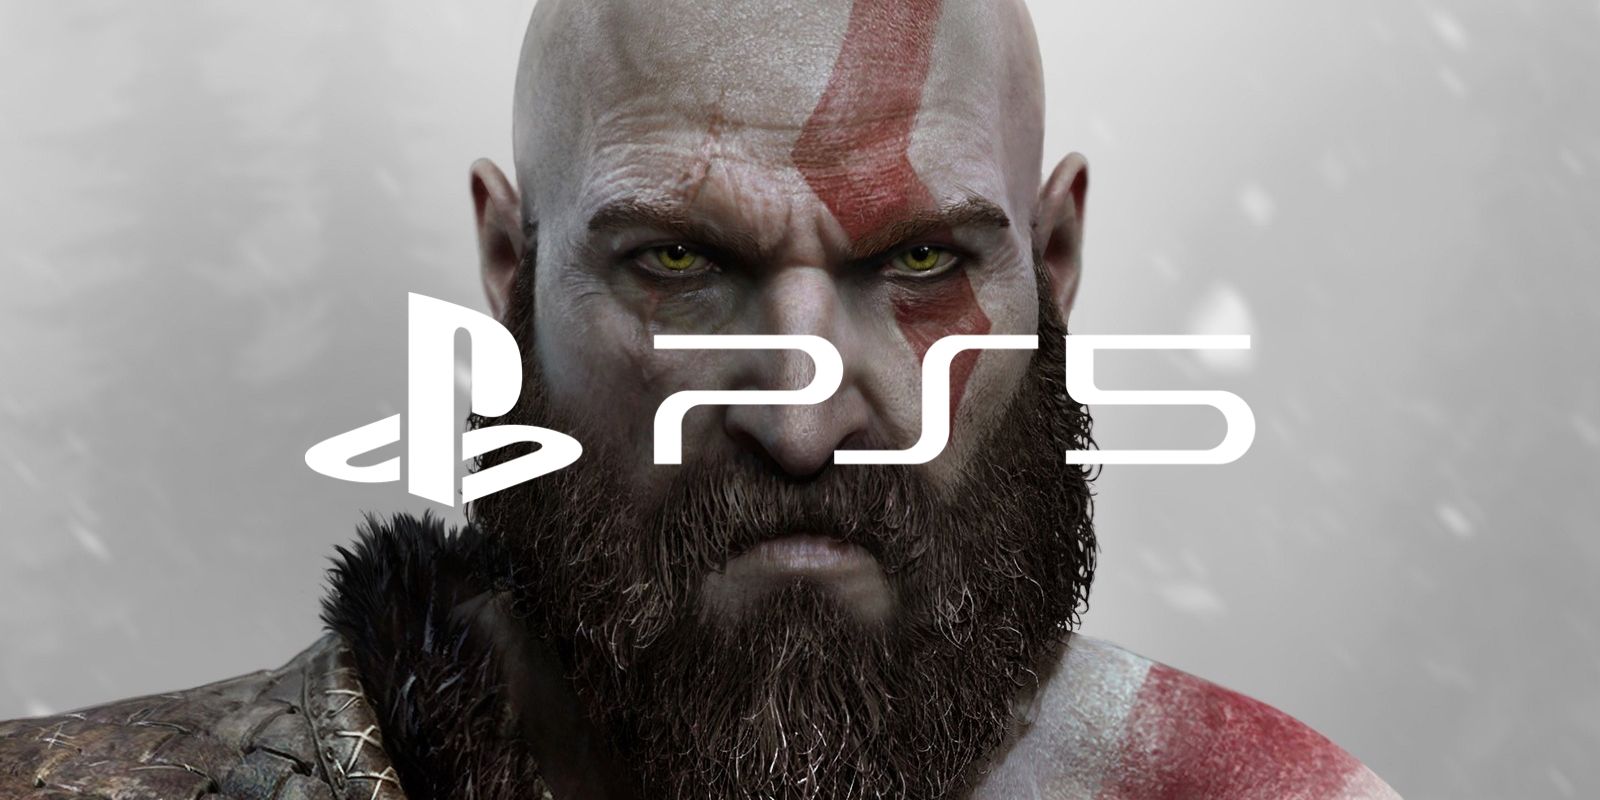 God of War 2 may debut simultaneously with Sony PS5 